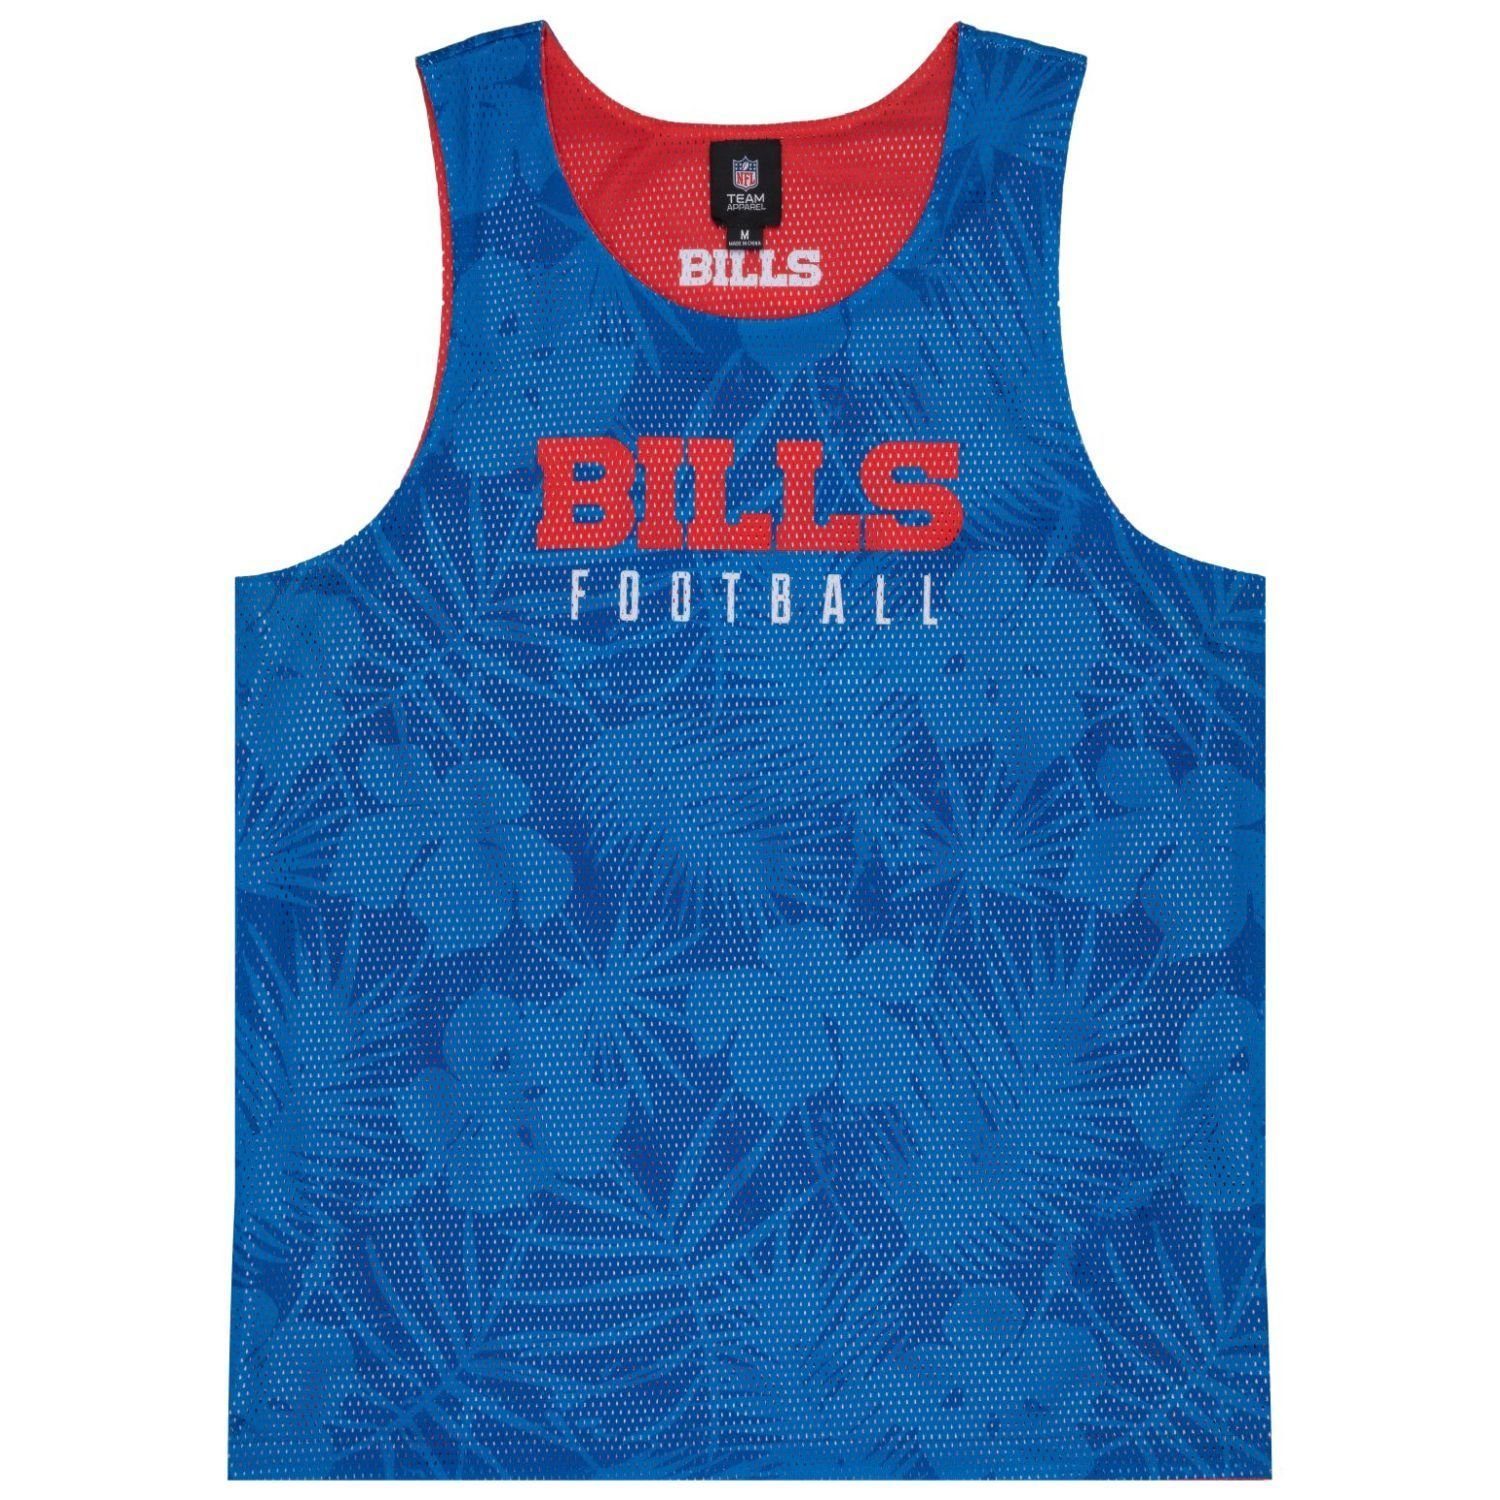 Forever Collectibles Muskelshirt Reversible Floral NFL Buffalo Bills